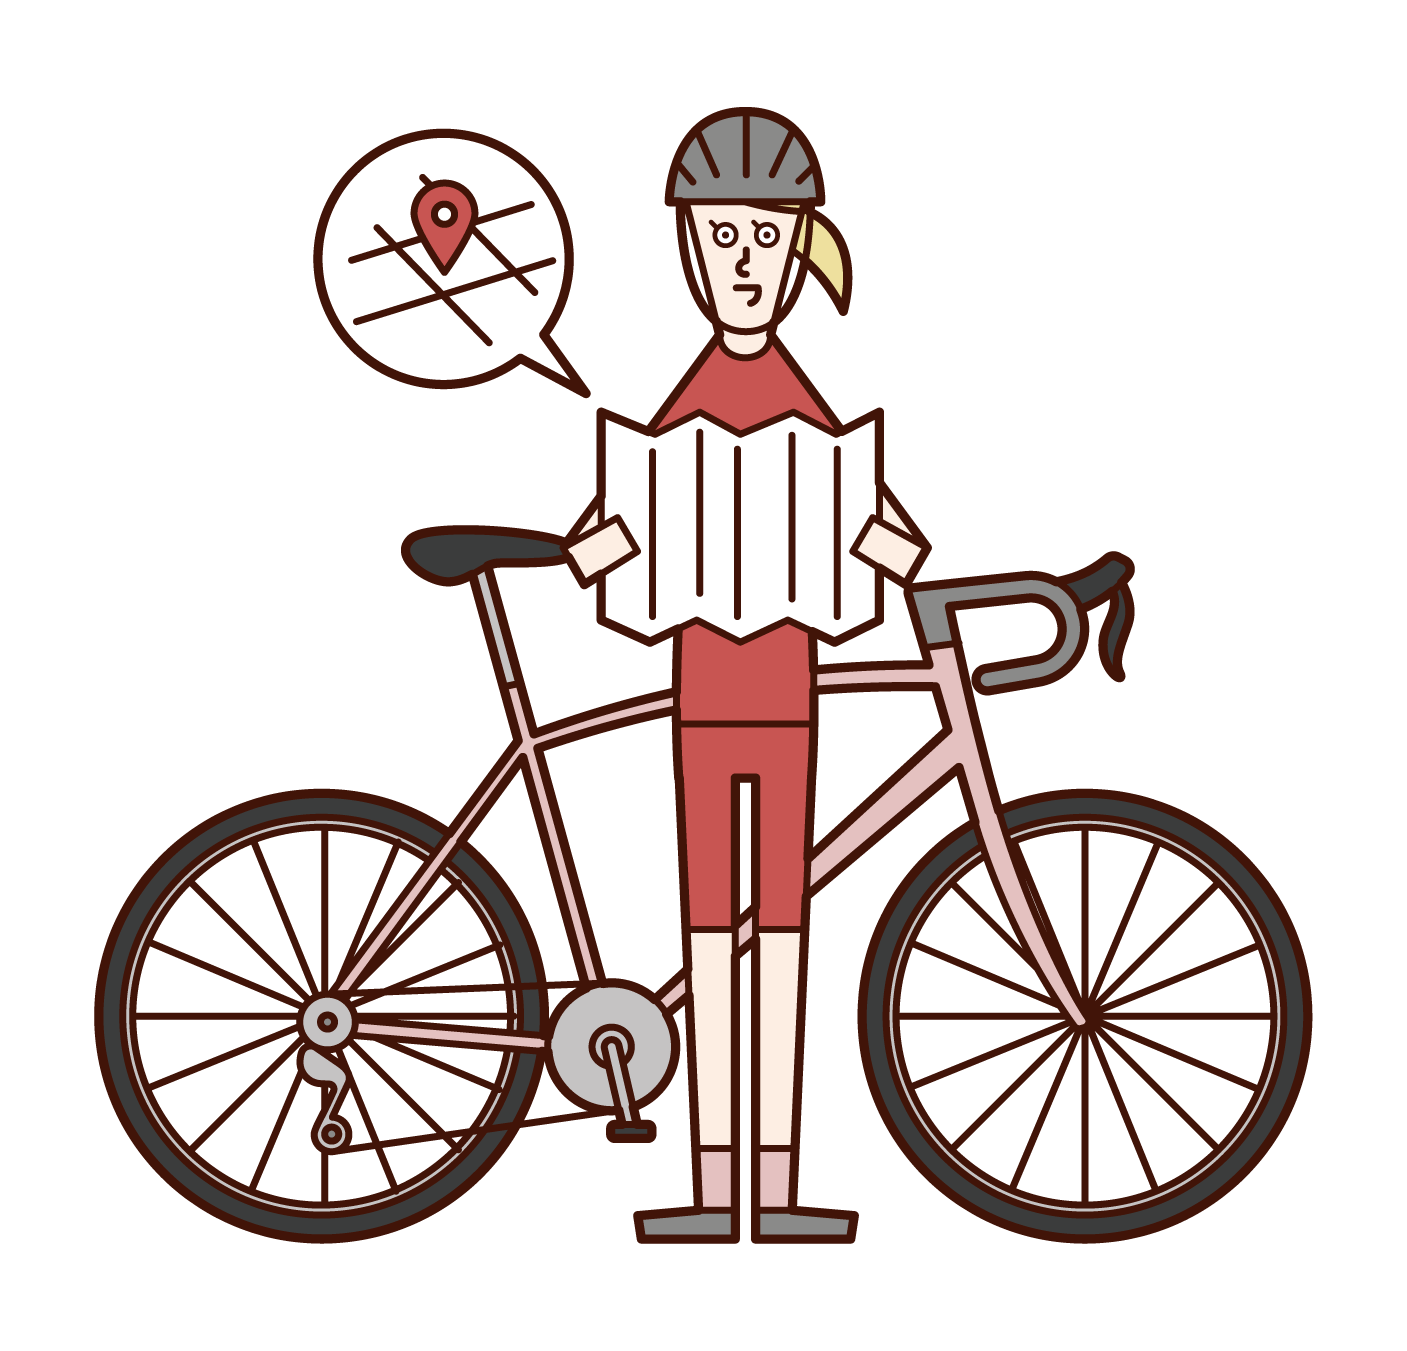 Illustration of a bicycle rider (woman) looking out at the map